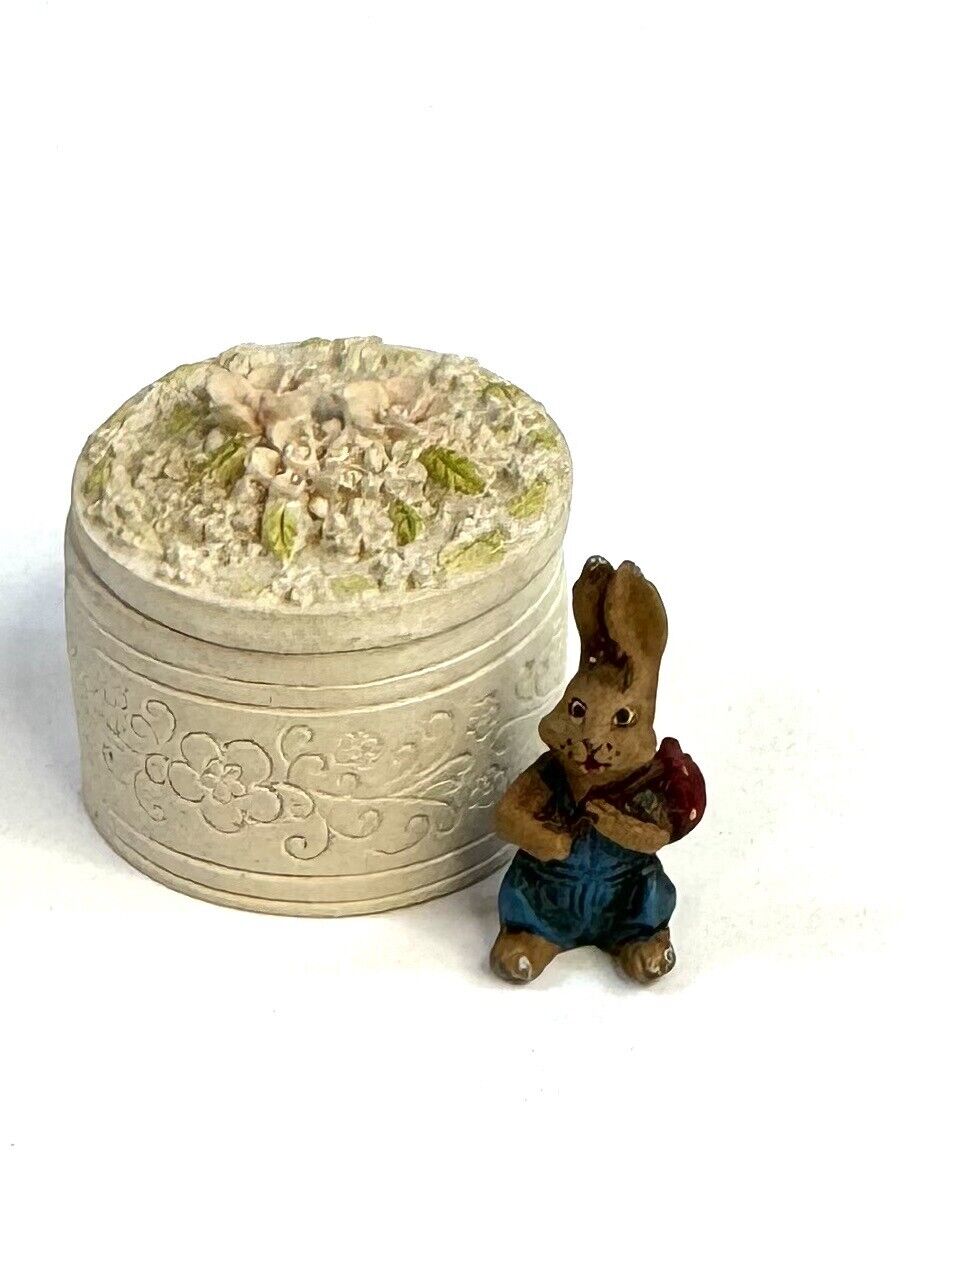 Resin Floral Trinket Box With Easter Bunny Rabbit